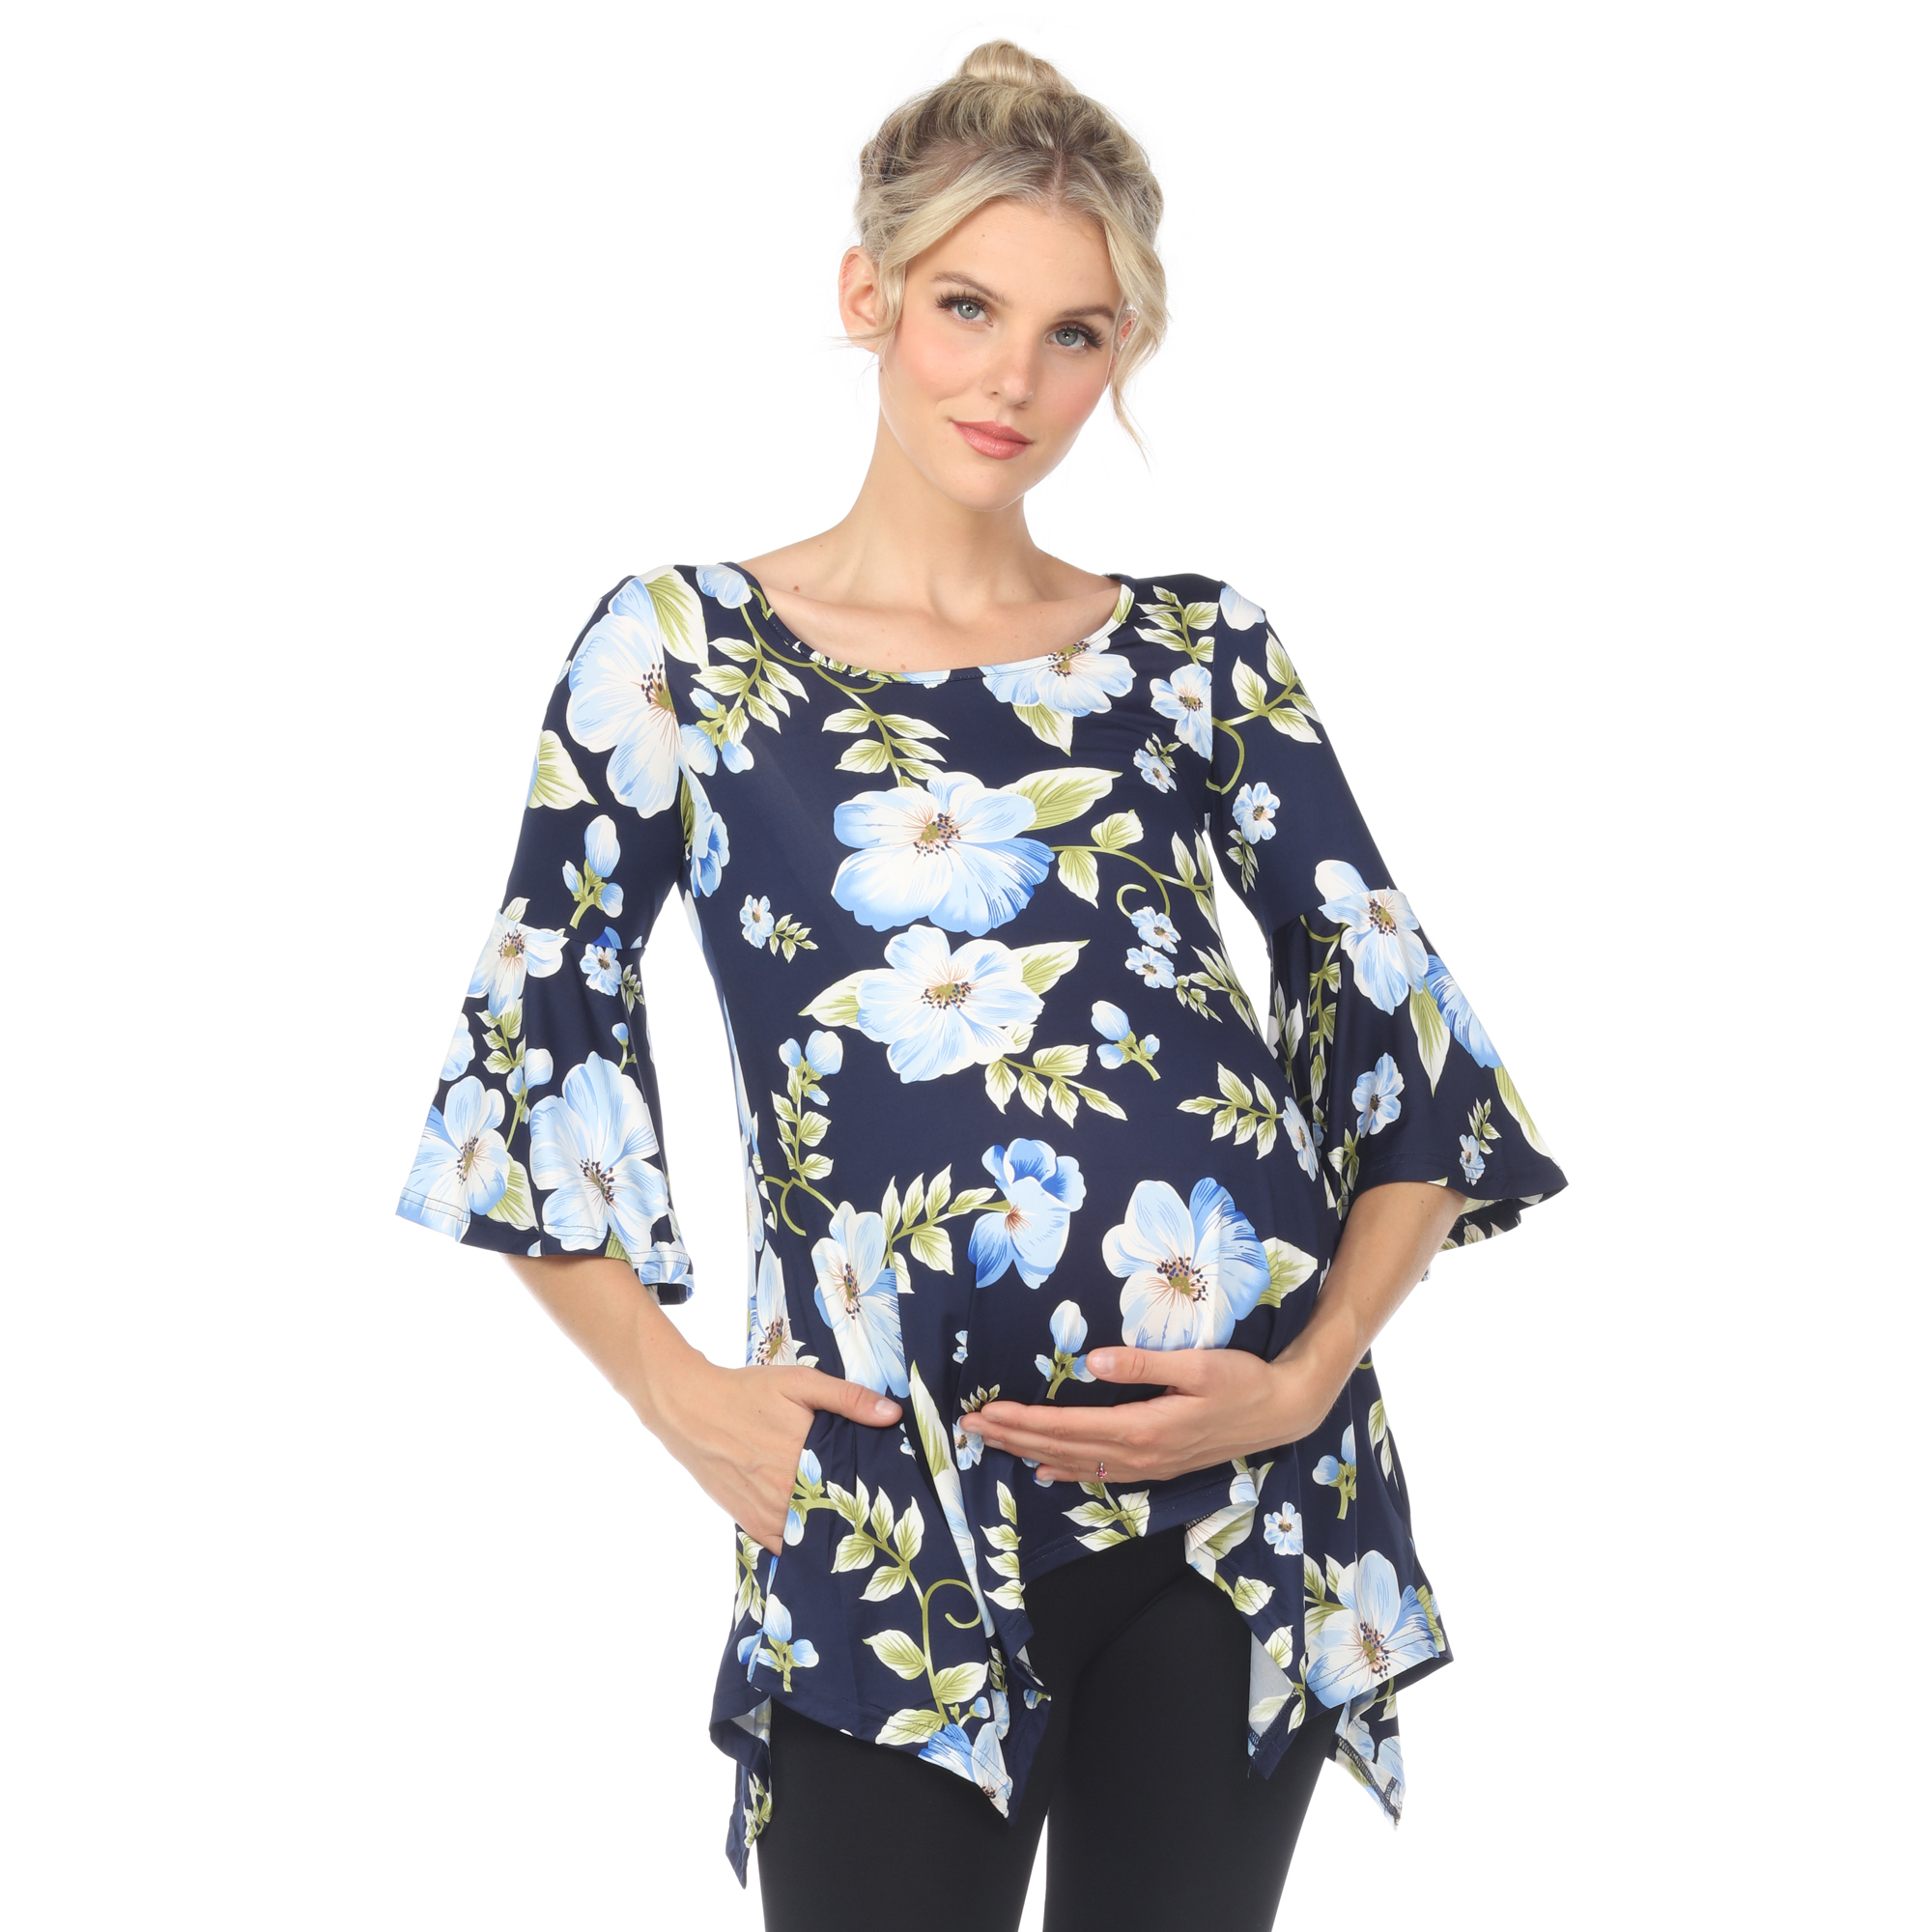 White Mark Women's Maternity Floral Print Quarter Sleeve Tunic Top With Pockets - Blue Flower, X-Large